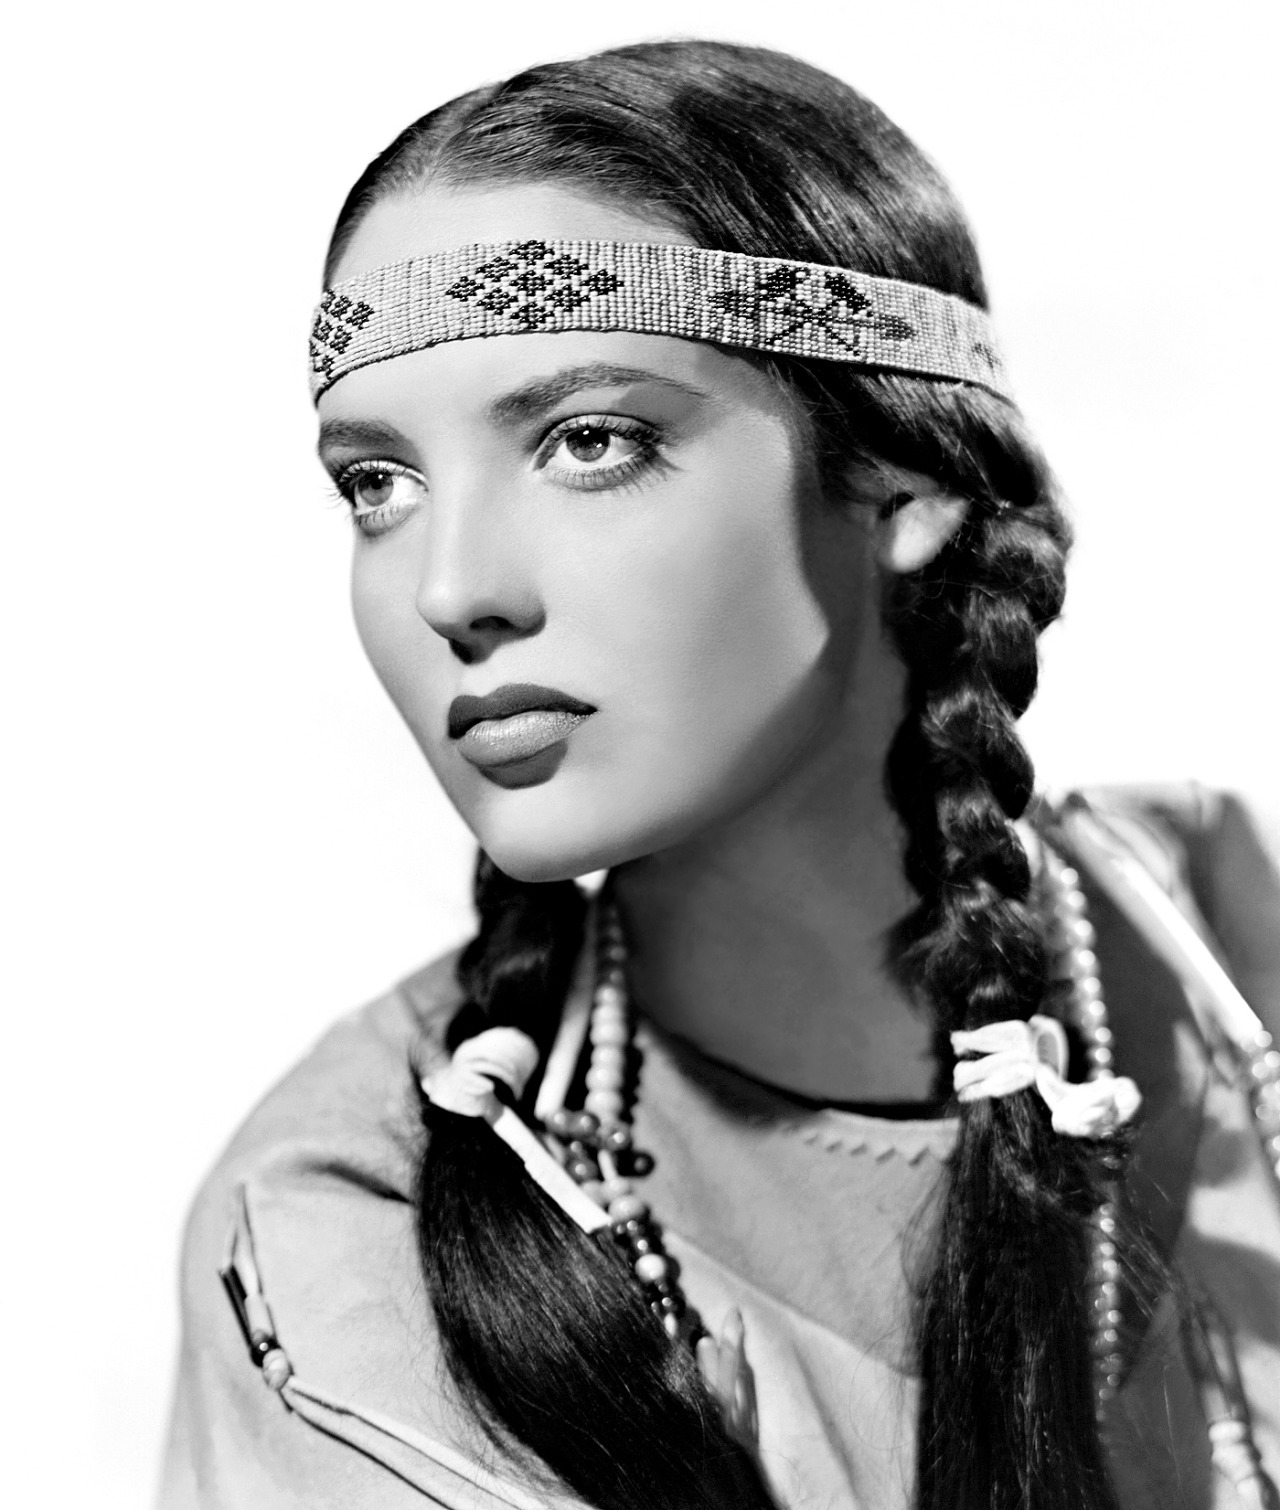 Linda Darnell as “Dawn Starlight” in Buffalo Bill (William A. Wellman, 1944)
Cultural appropriation and erasure have a long history in Hollywood.